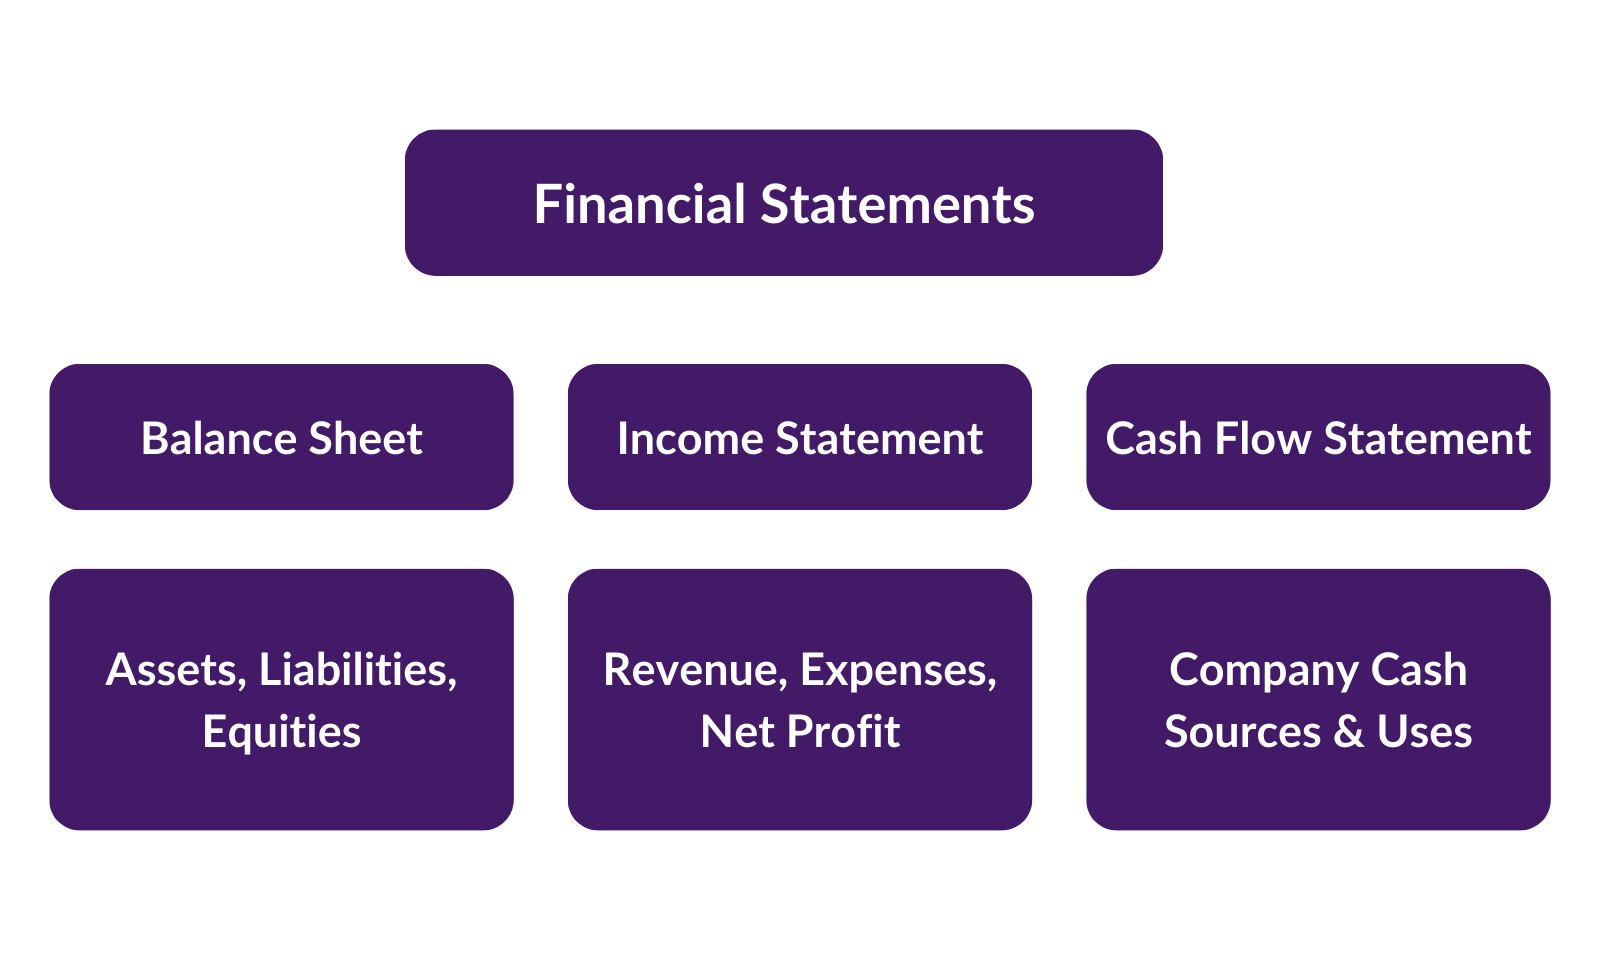 Diagram showing the three main financial statements and their components